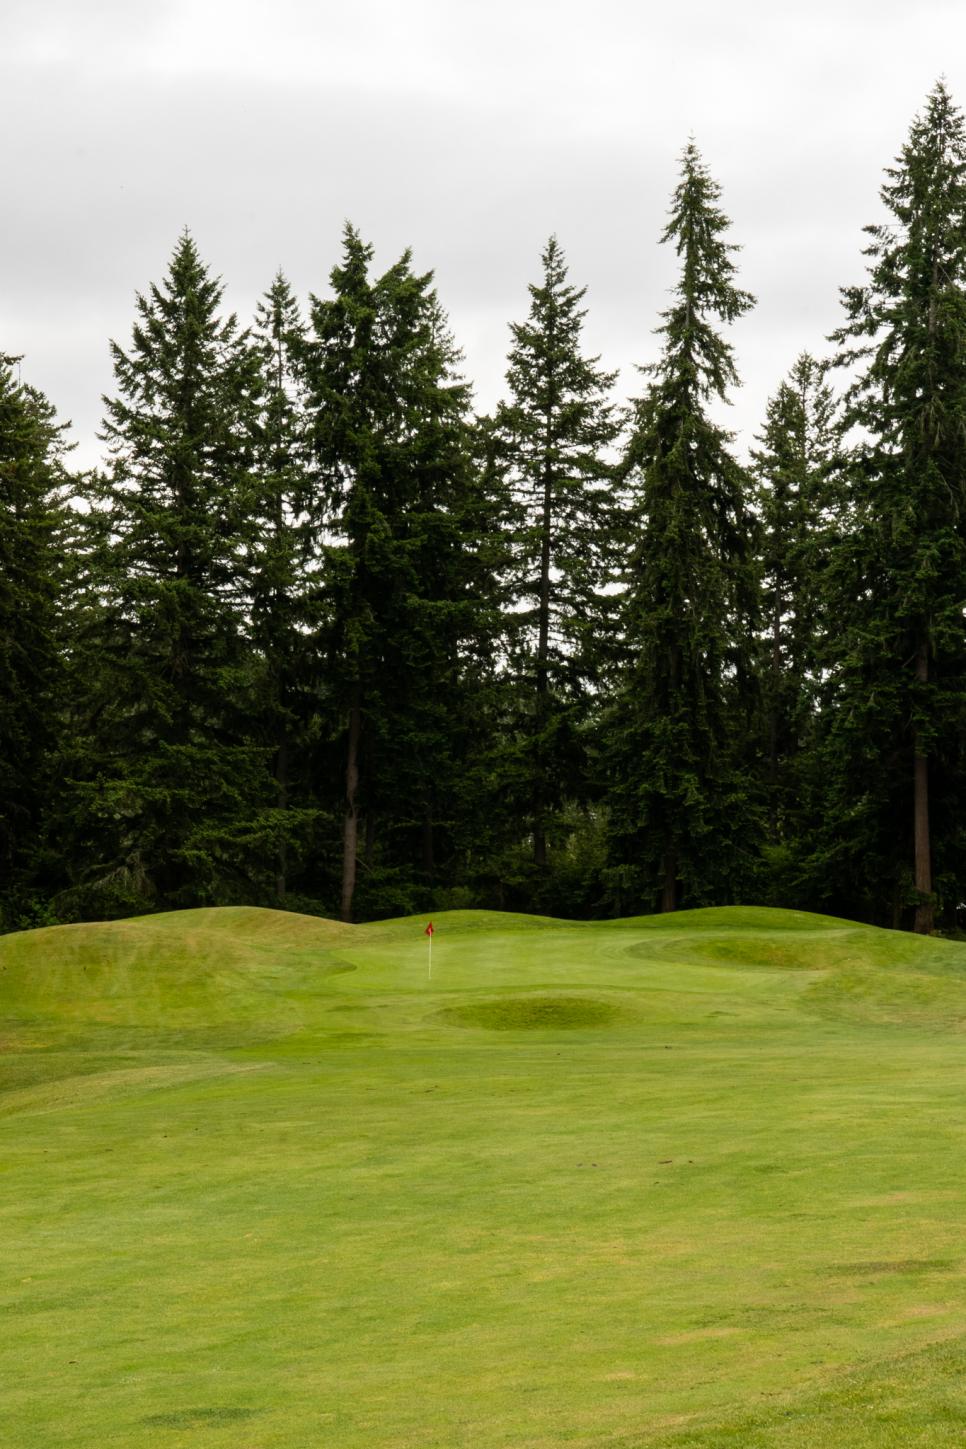 /content/dam/images/golfdigest/fullset/course-photos-for-places-to-play/Hawks_Prairie_Woodland_23104.jpg